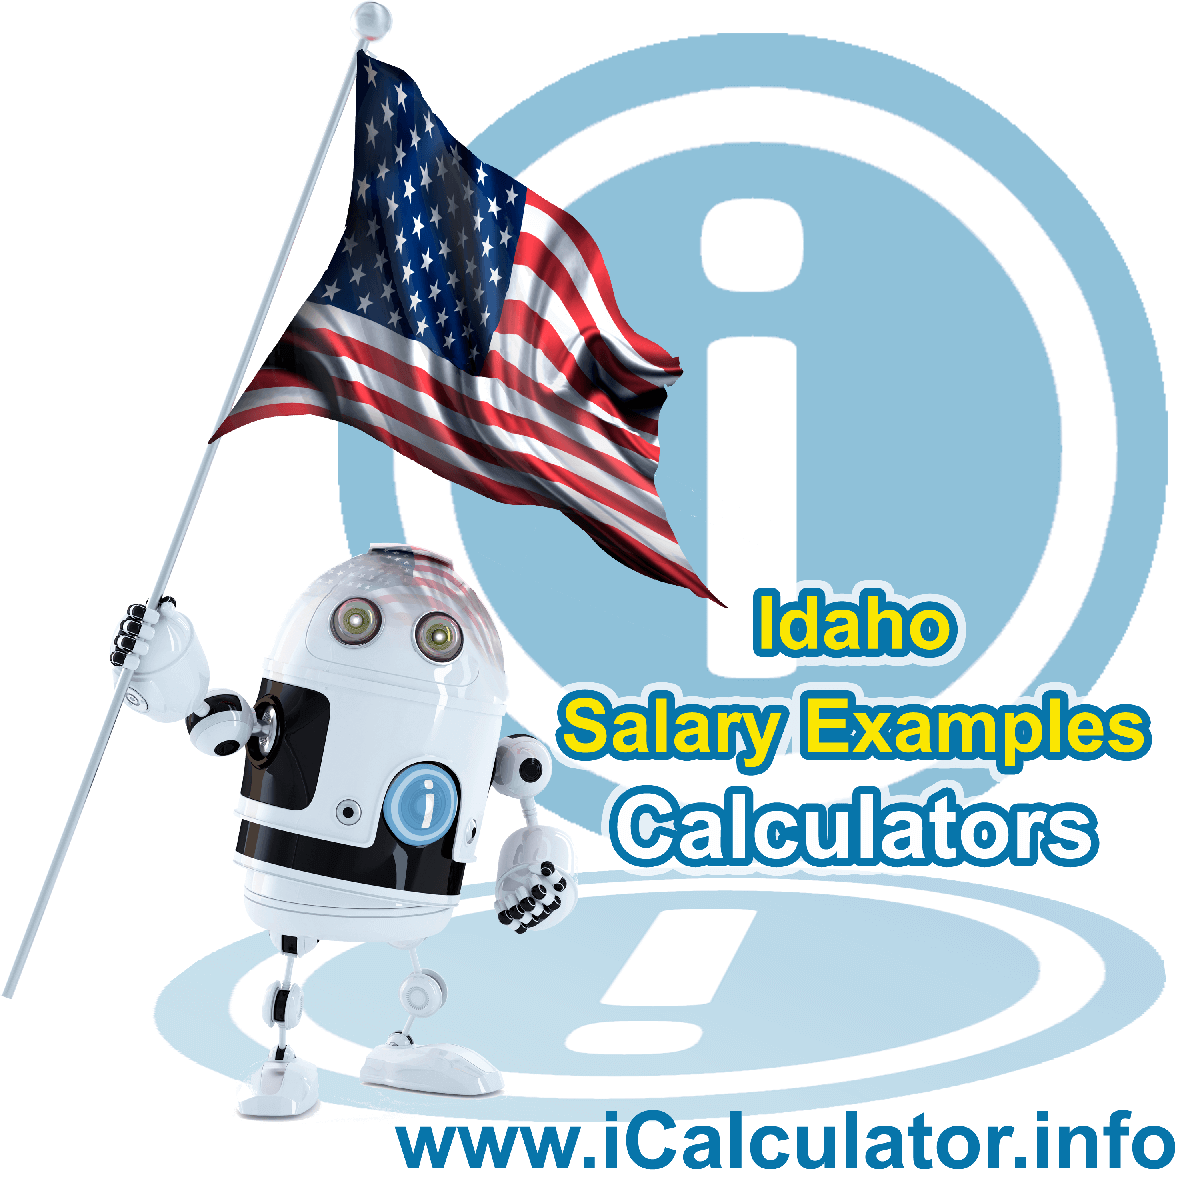 Idaho Salary Example for $140,000.00 in 2022 | iCalculator™ | $140,000.00 salary example for employee and employer paying Idaho State tincome taxes. Detailed salary after tax calculation including Idaho State Tax, Federal State Tax, Medicare Deductions, Social Security, Capital Gains and other income tax and salary deductions complete with supporting Idaho state tax tables 